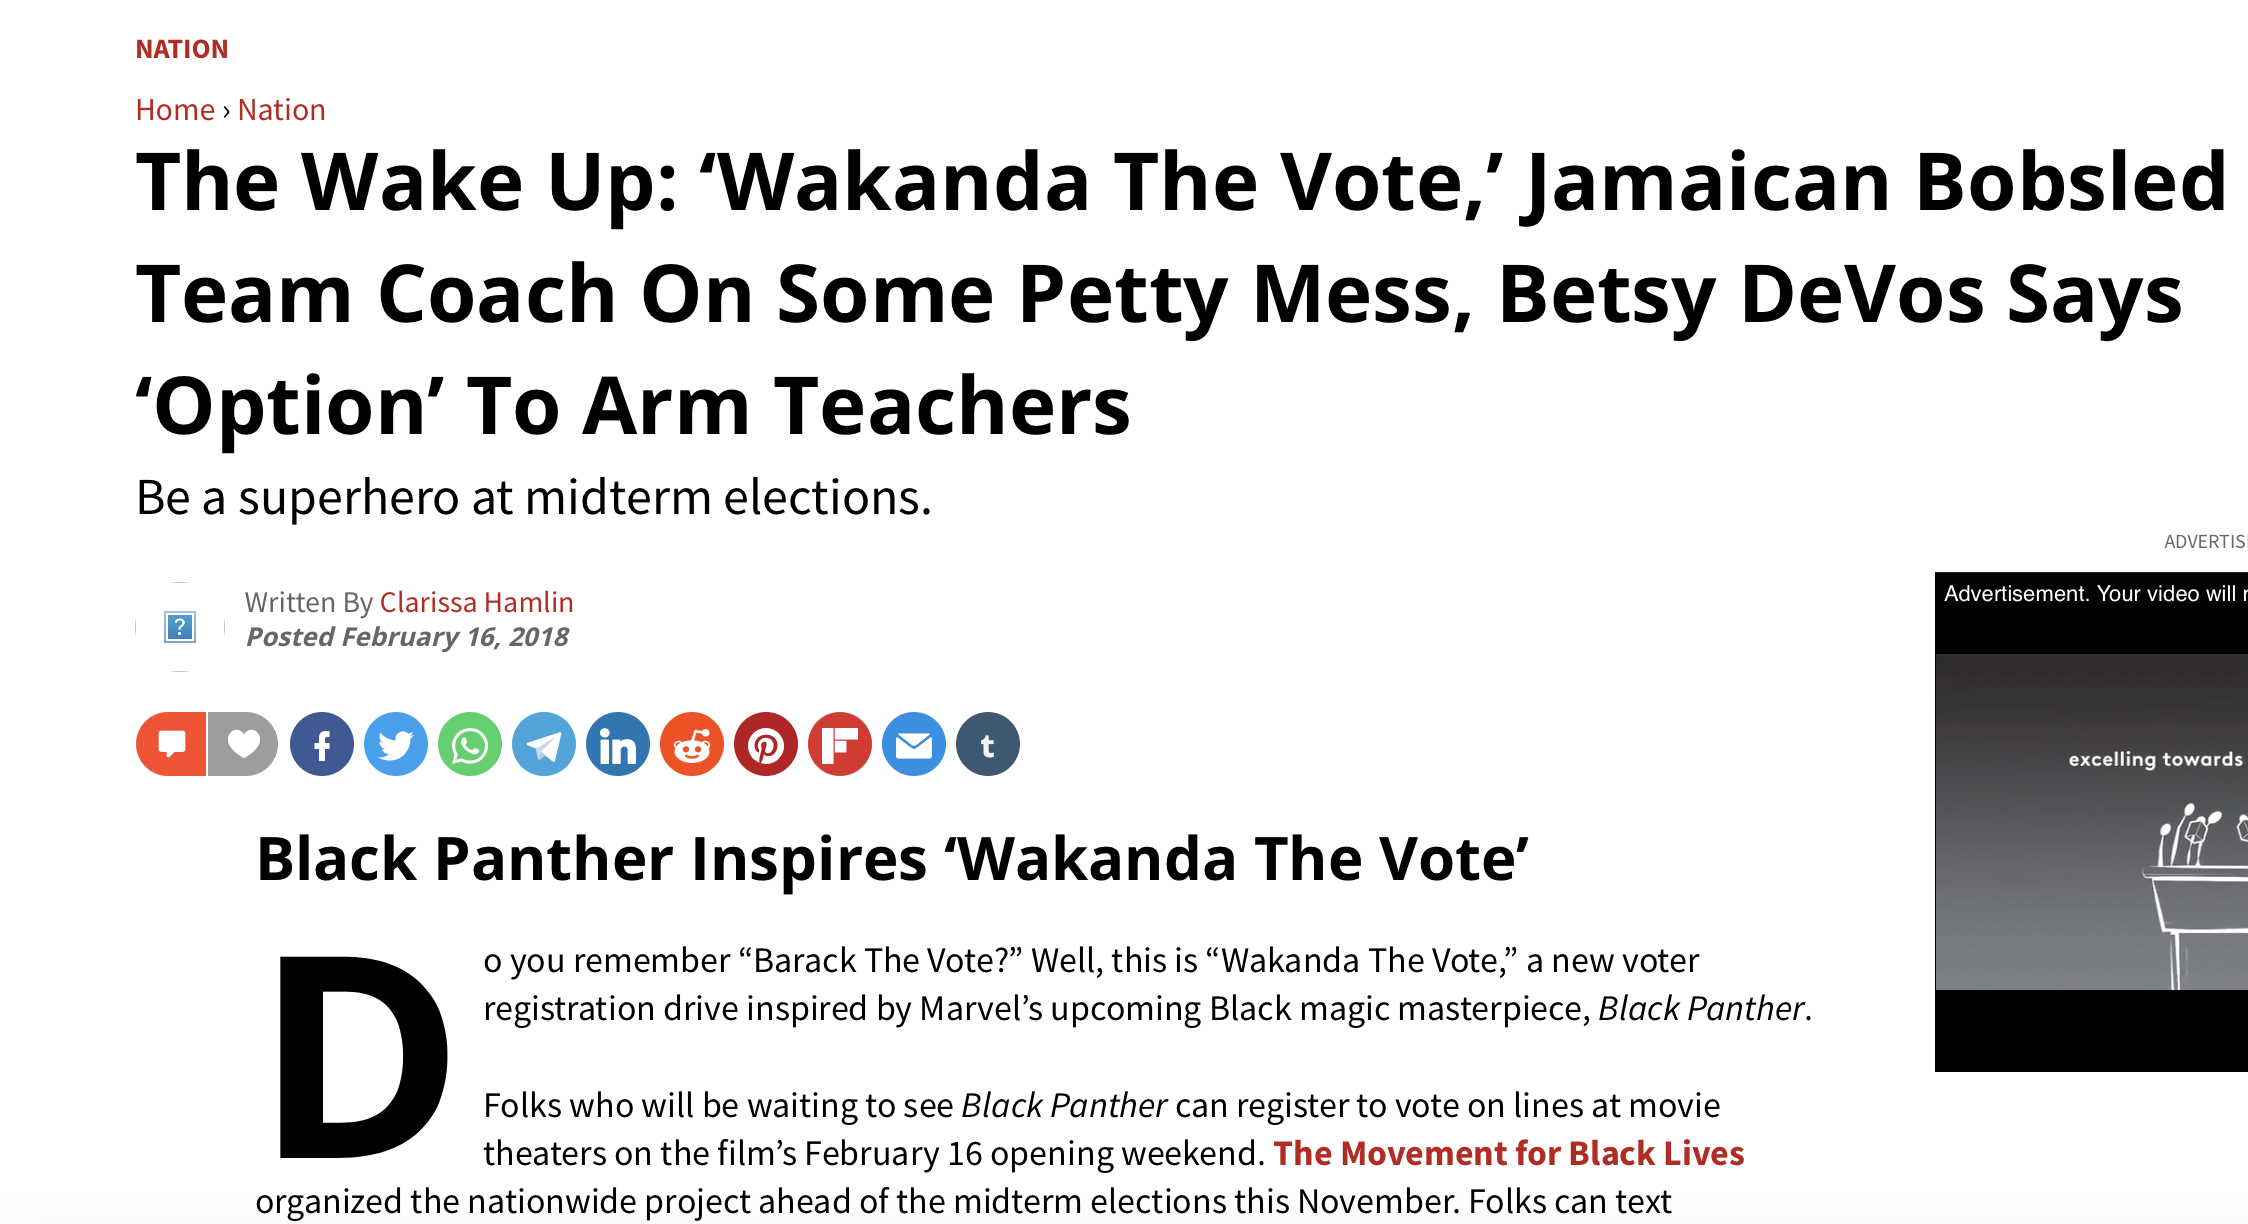 The Wake Up: ‘Wakanda The Vote,’ Jamaican Bobsled Team Coach On Some Petty Mess, Betsy DeVos Says ‘Option’ To Arm Teachers